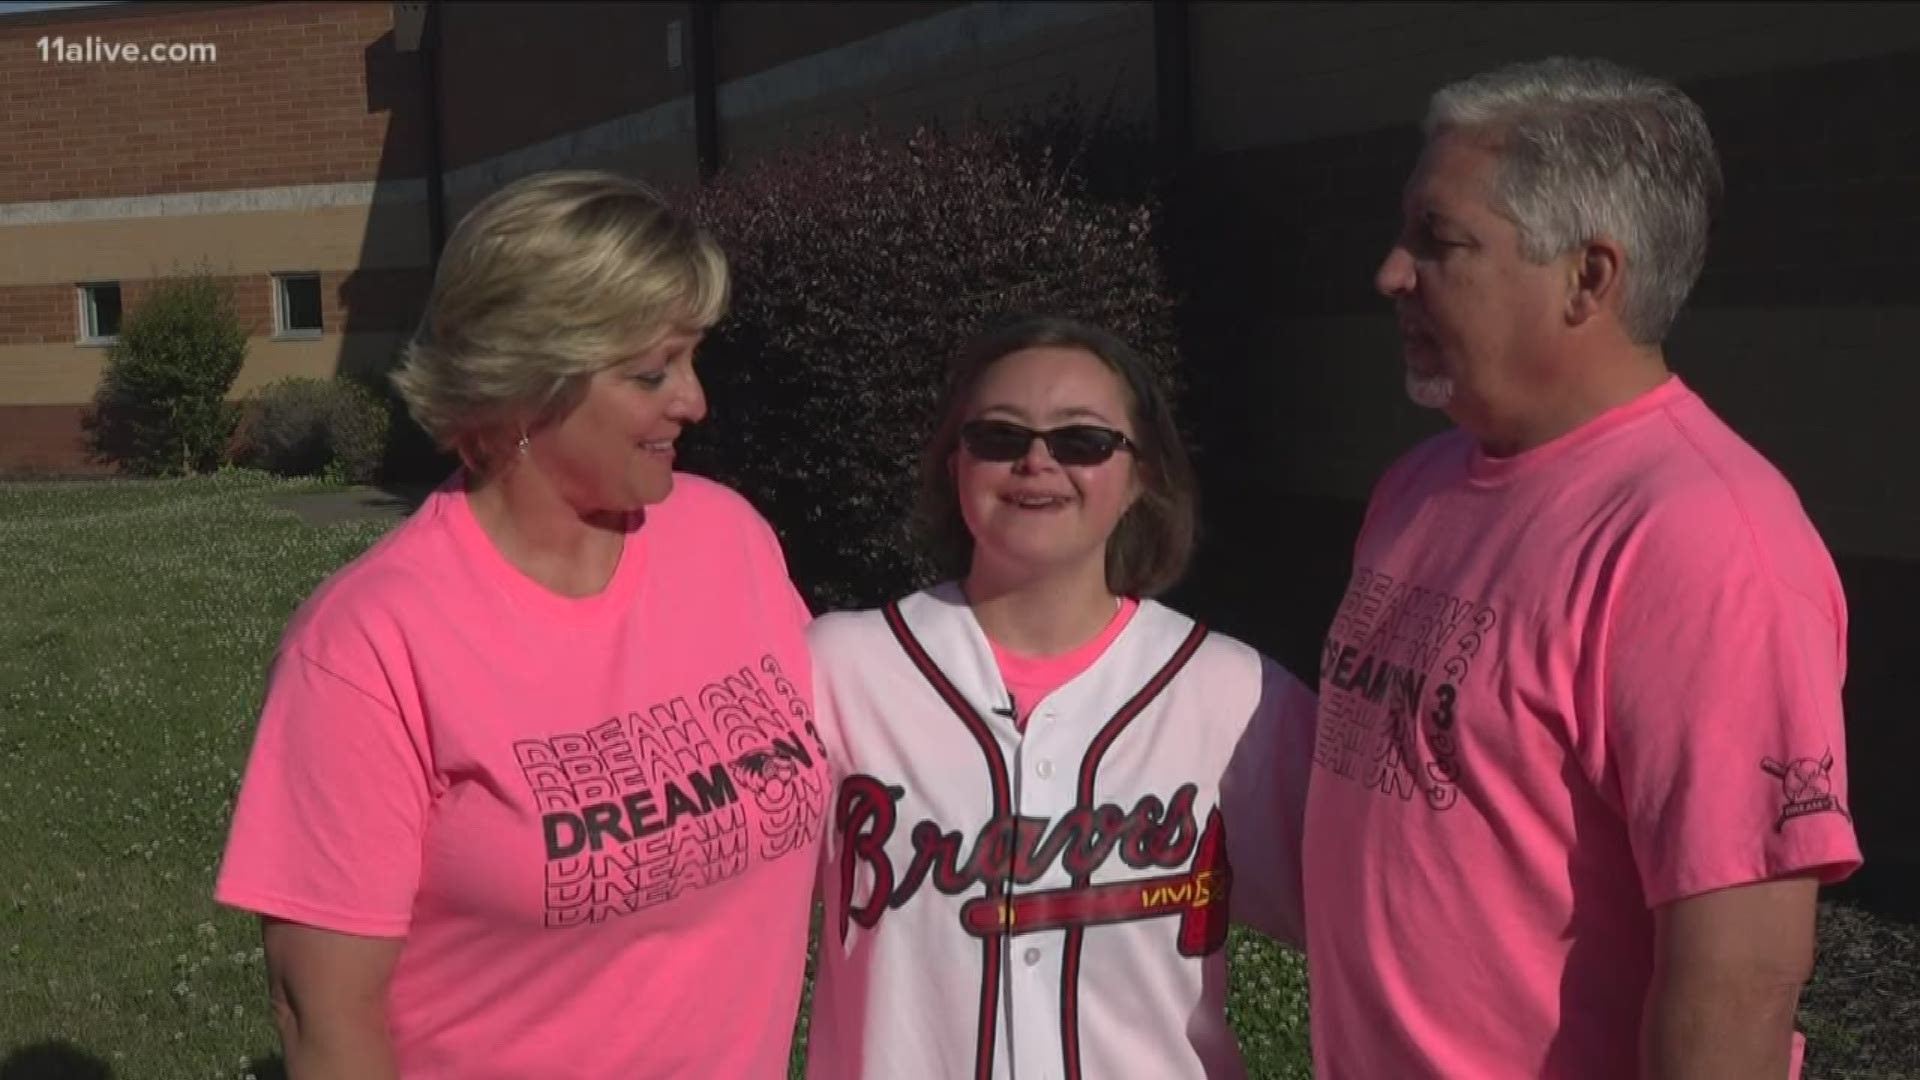 The students nominated Maggie Tressler for “Dream on 3” to remind her how much she is loved.